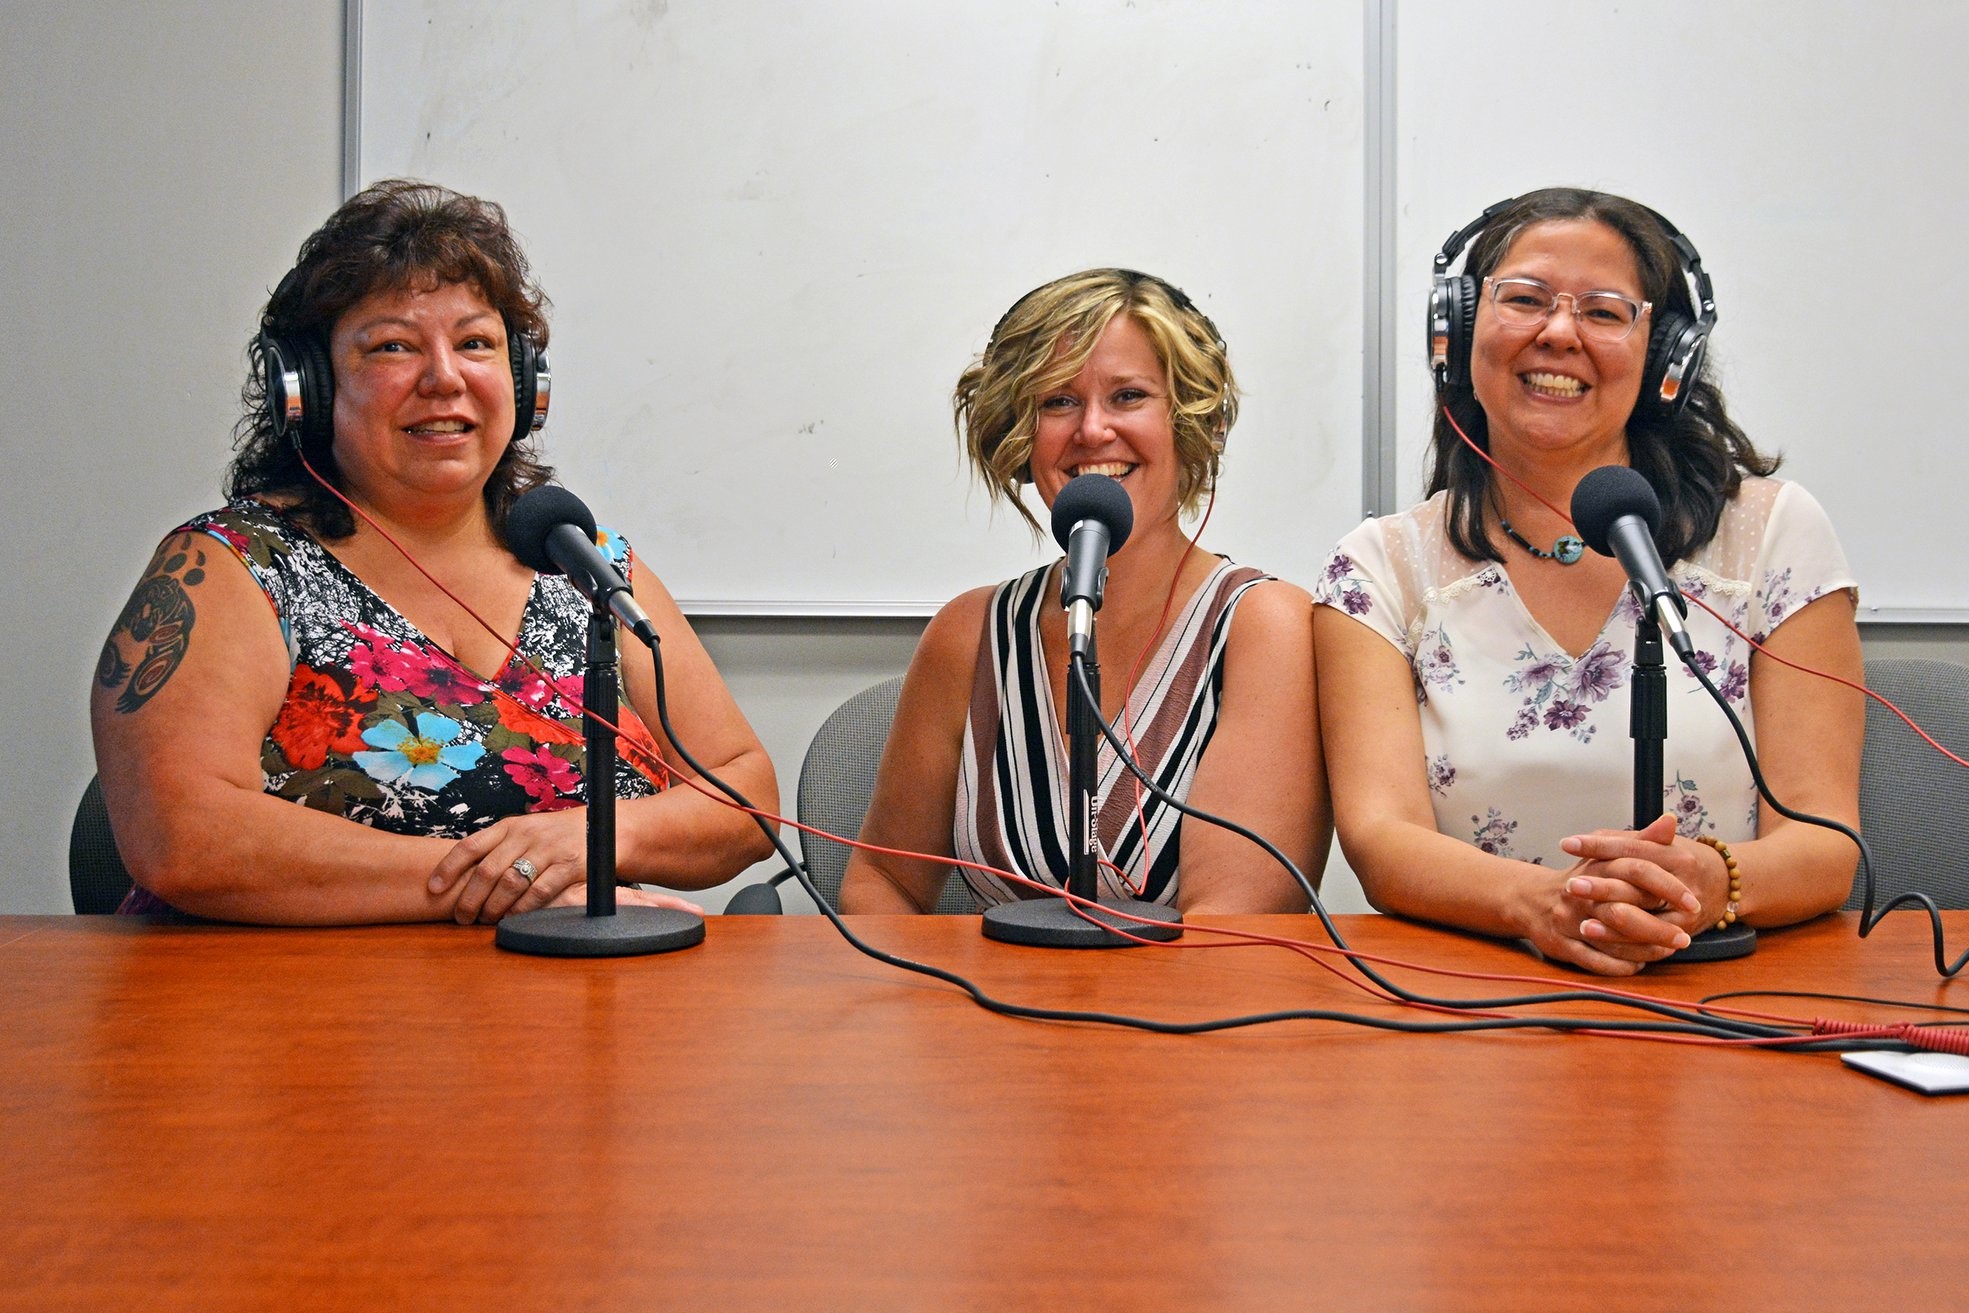 Three women sitting in a recording studio with headphones on and microphones in front of them pose for a picture in a recording studio.